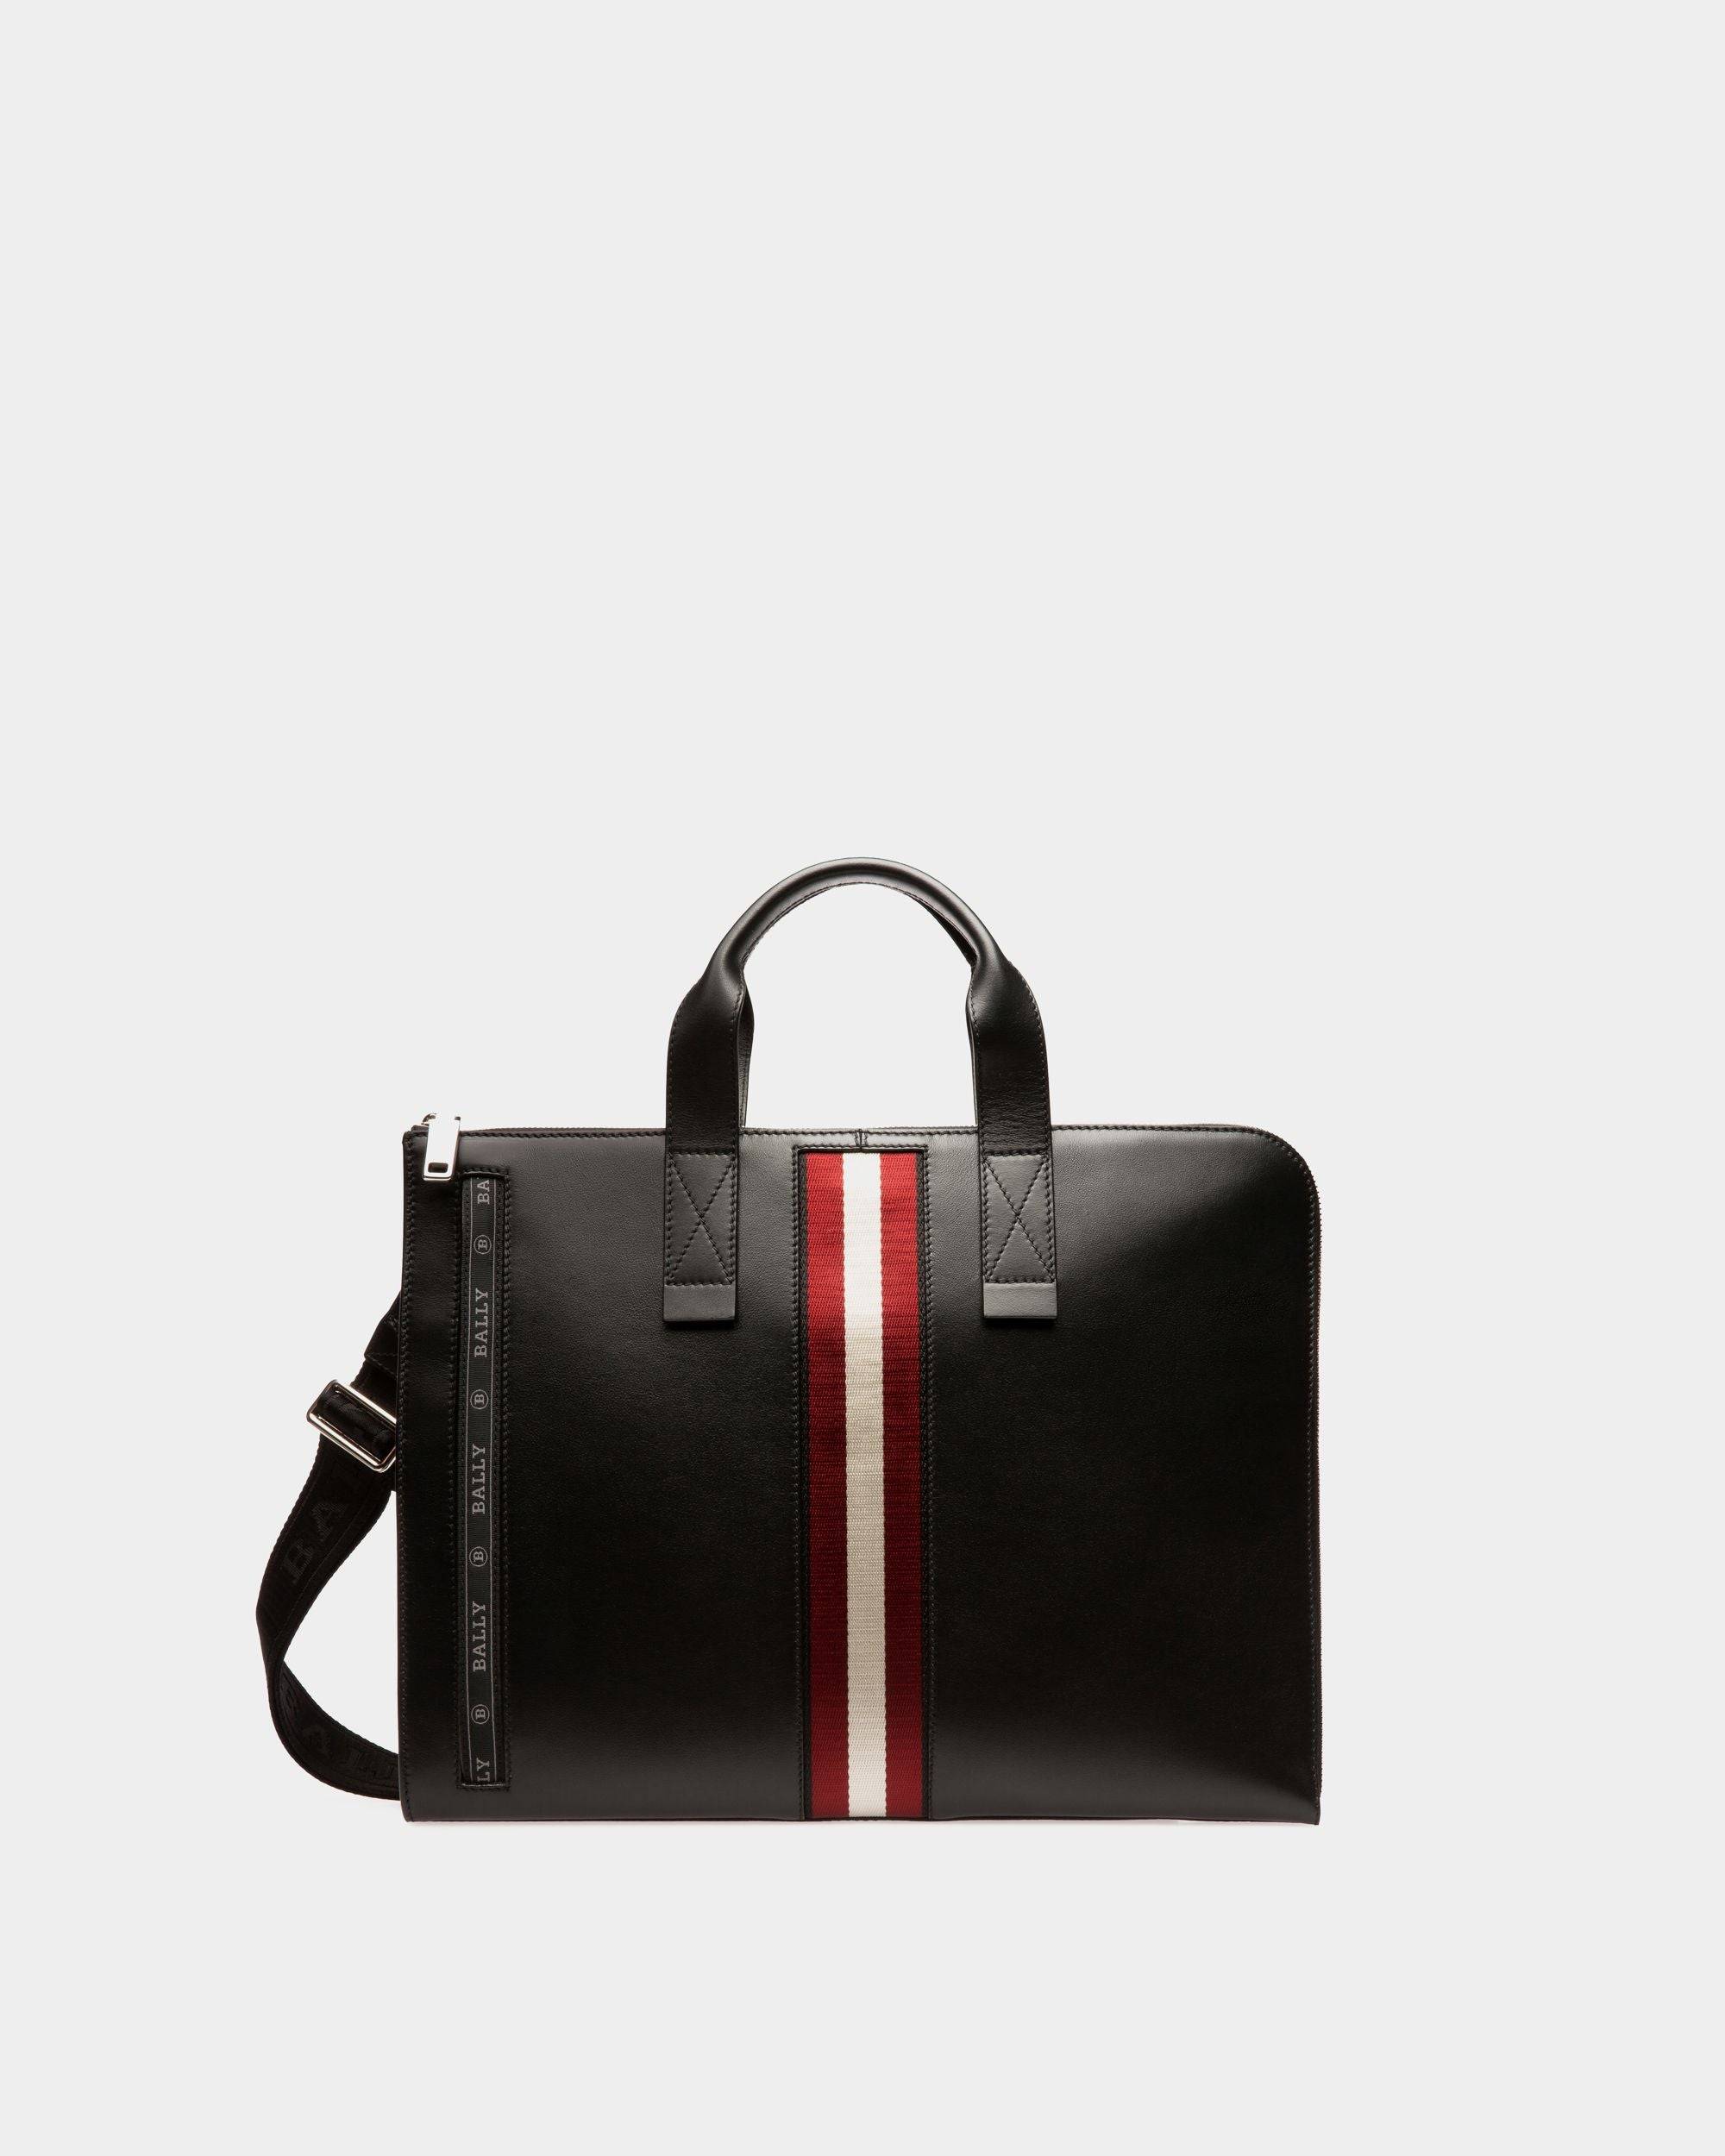 Henri | Men's Business Bag | Black Leather And Synthetic | Bally